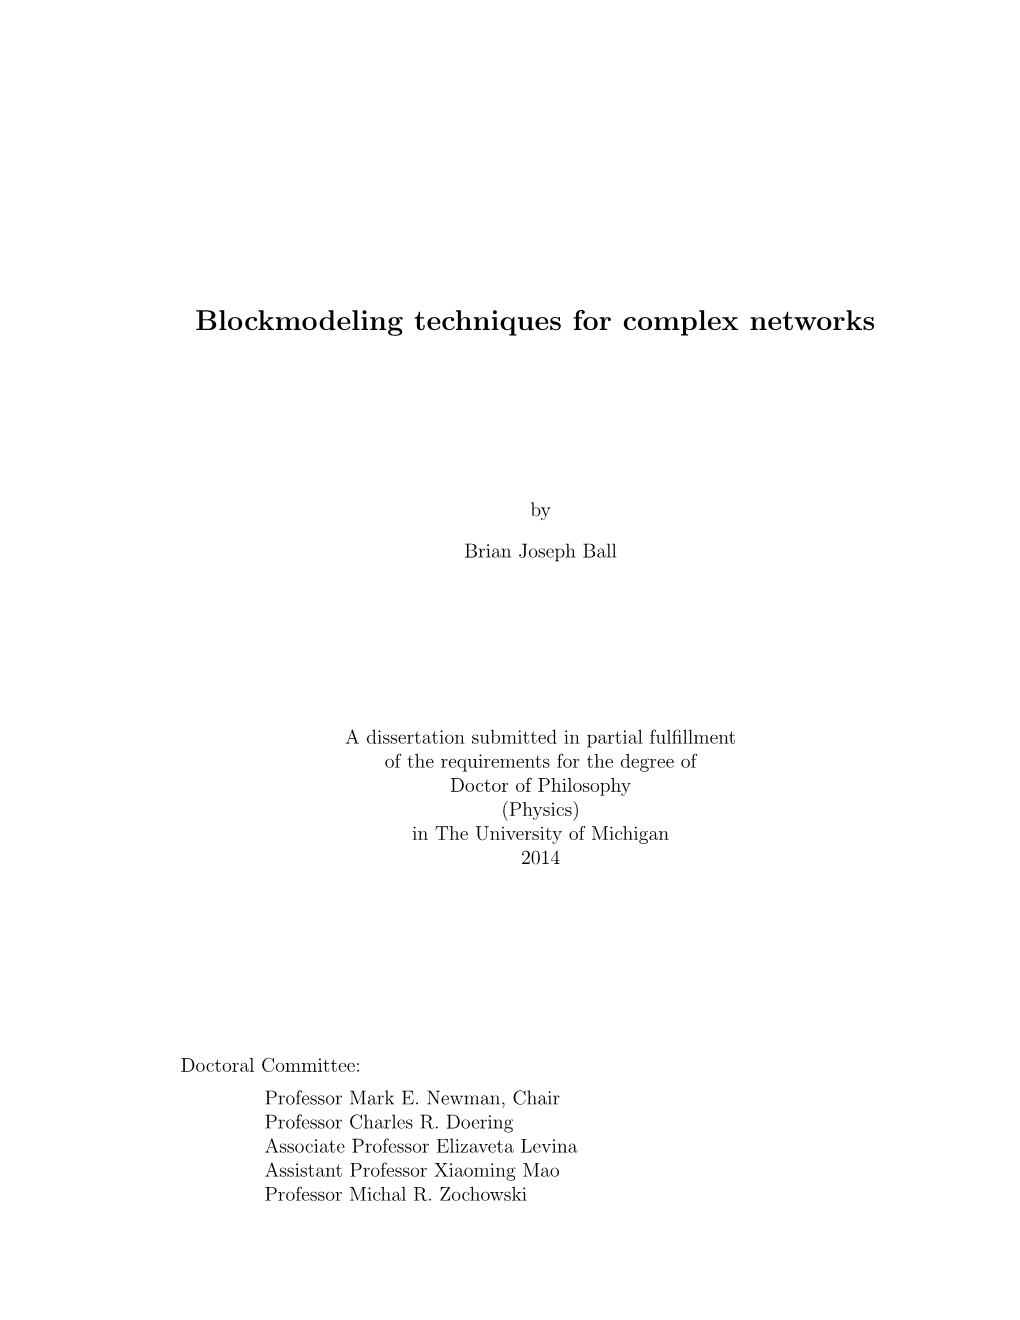 Blockmodeling Techniques for Complex Networks